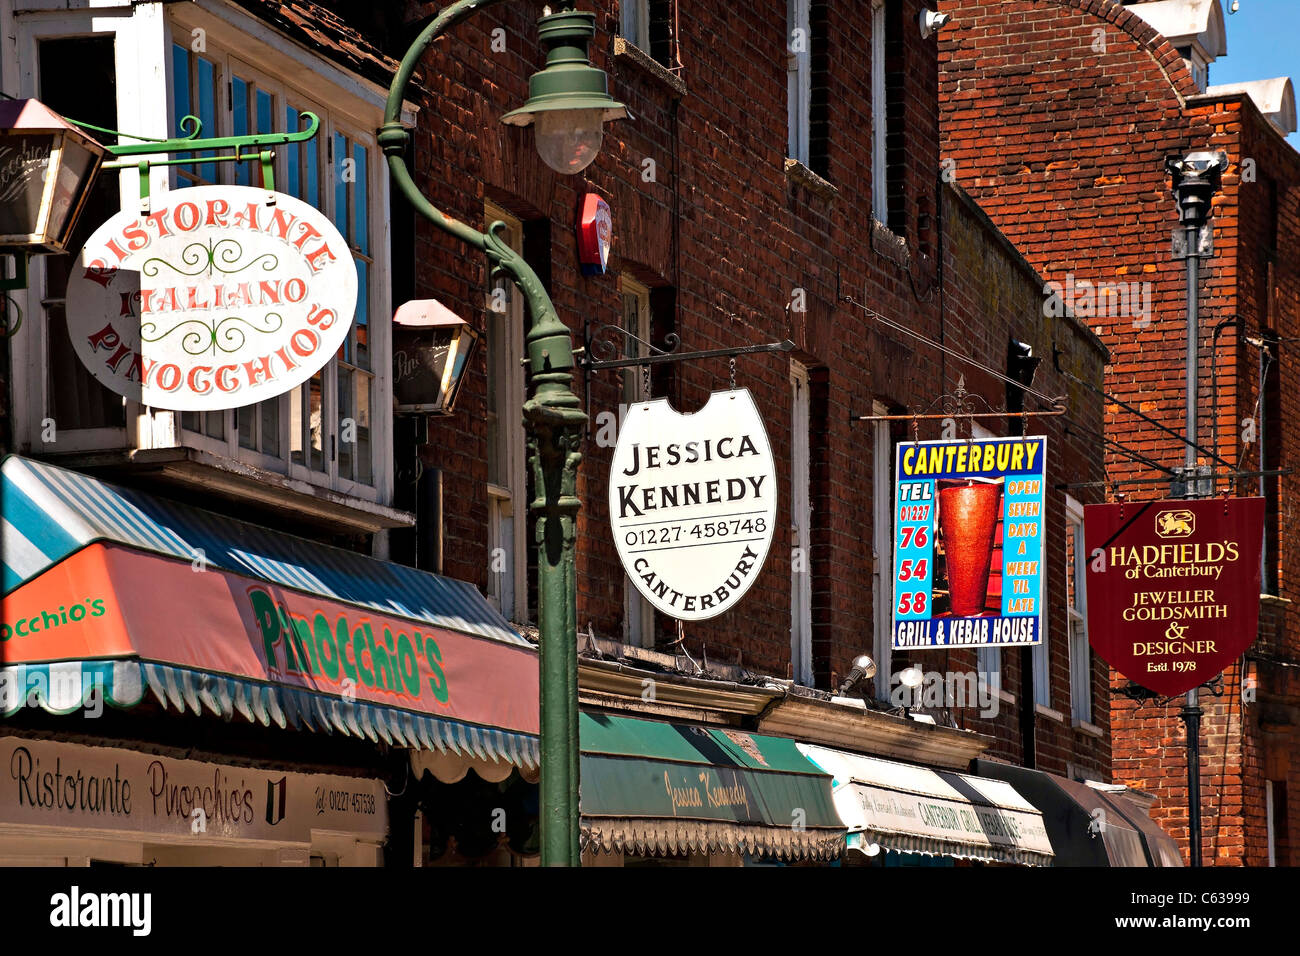 CANTERBURY, KENT, UK - JUNE 26, 2011:  Colourful shop signs in Canterbury Stock Photo